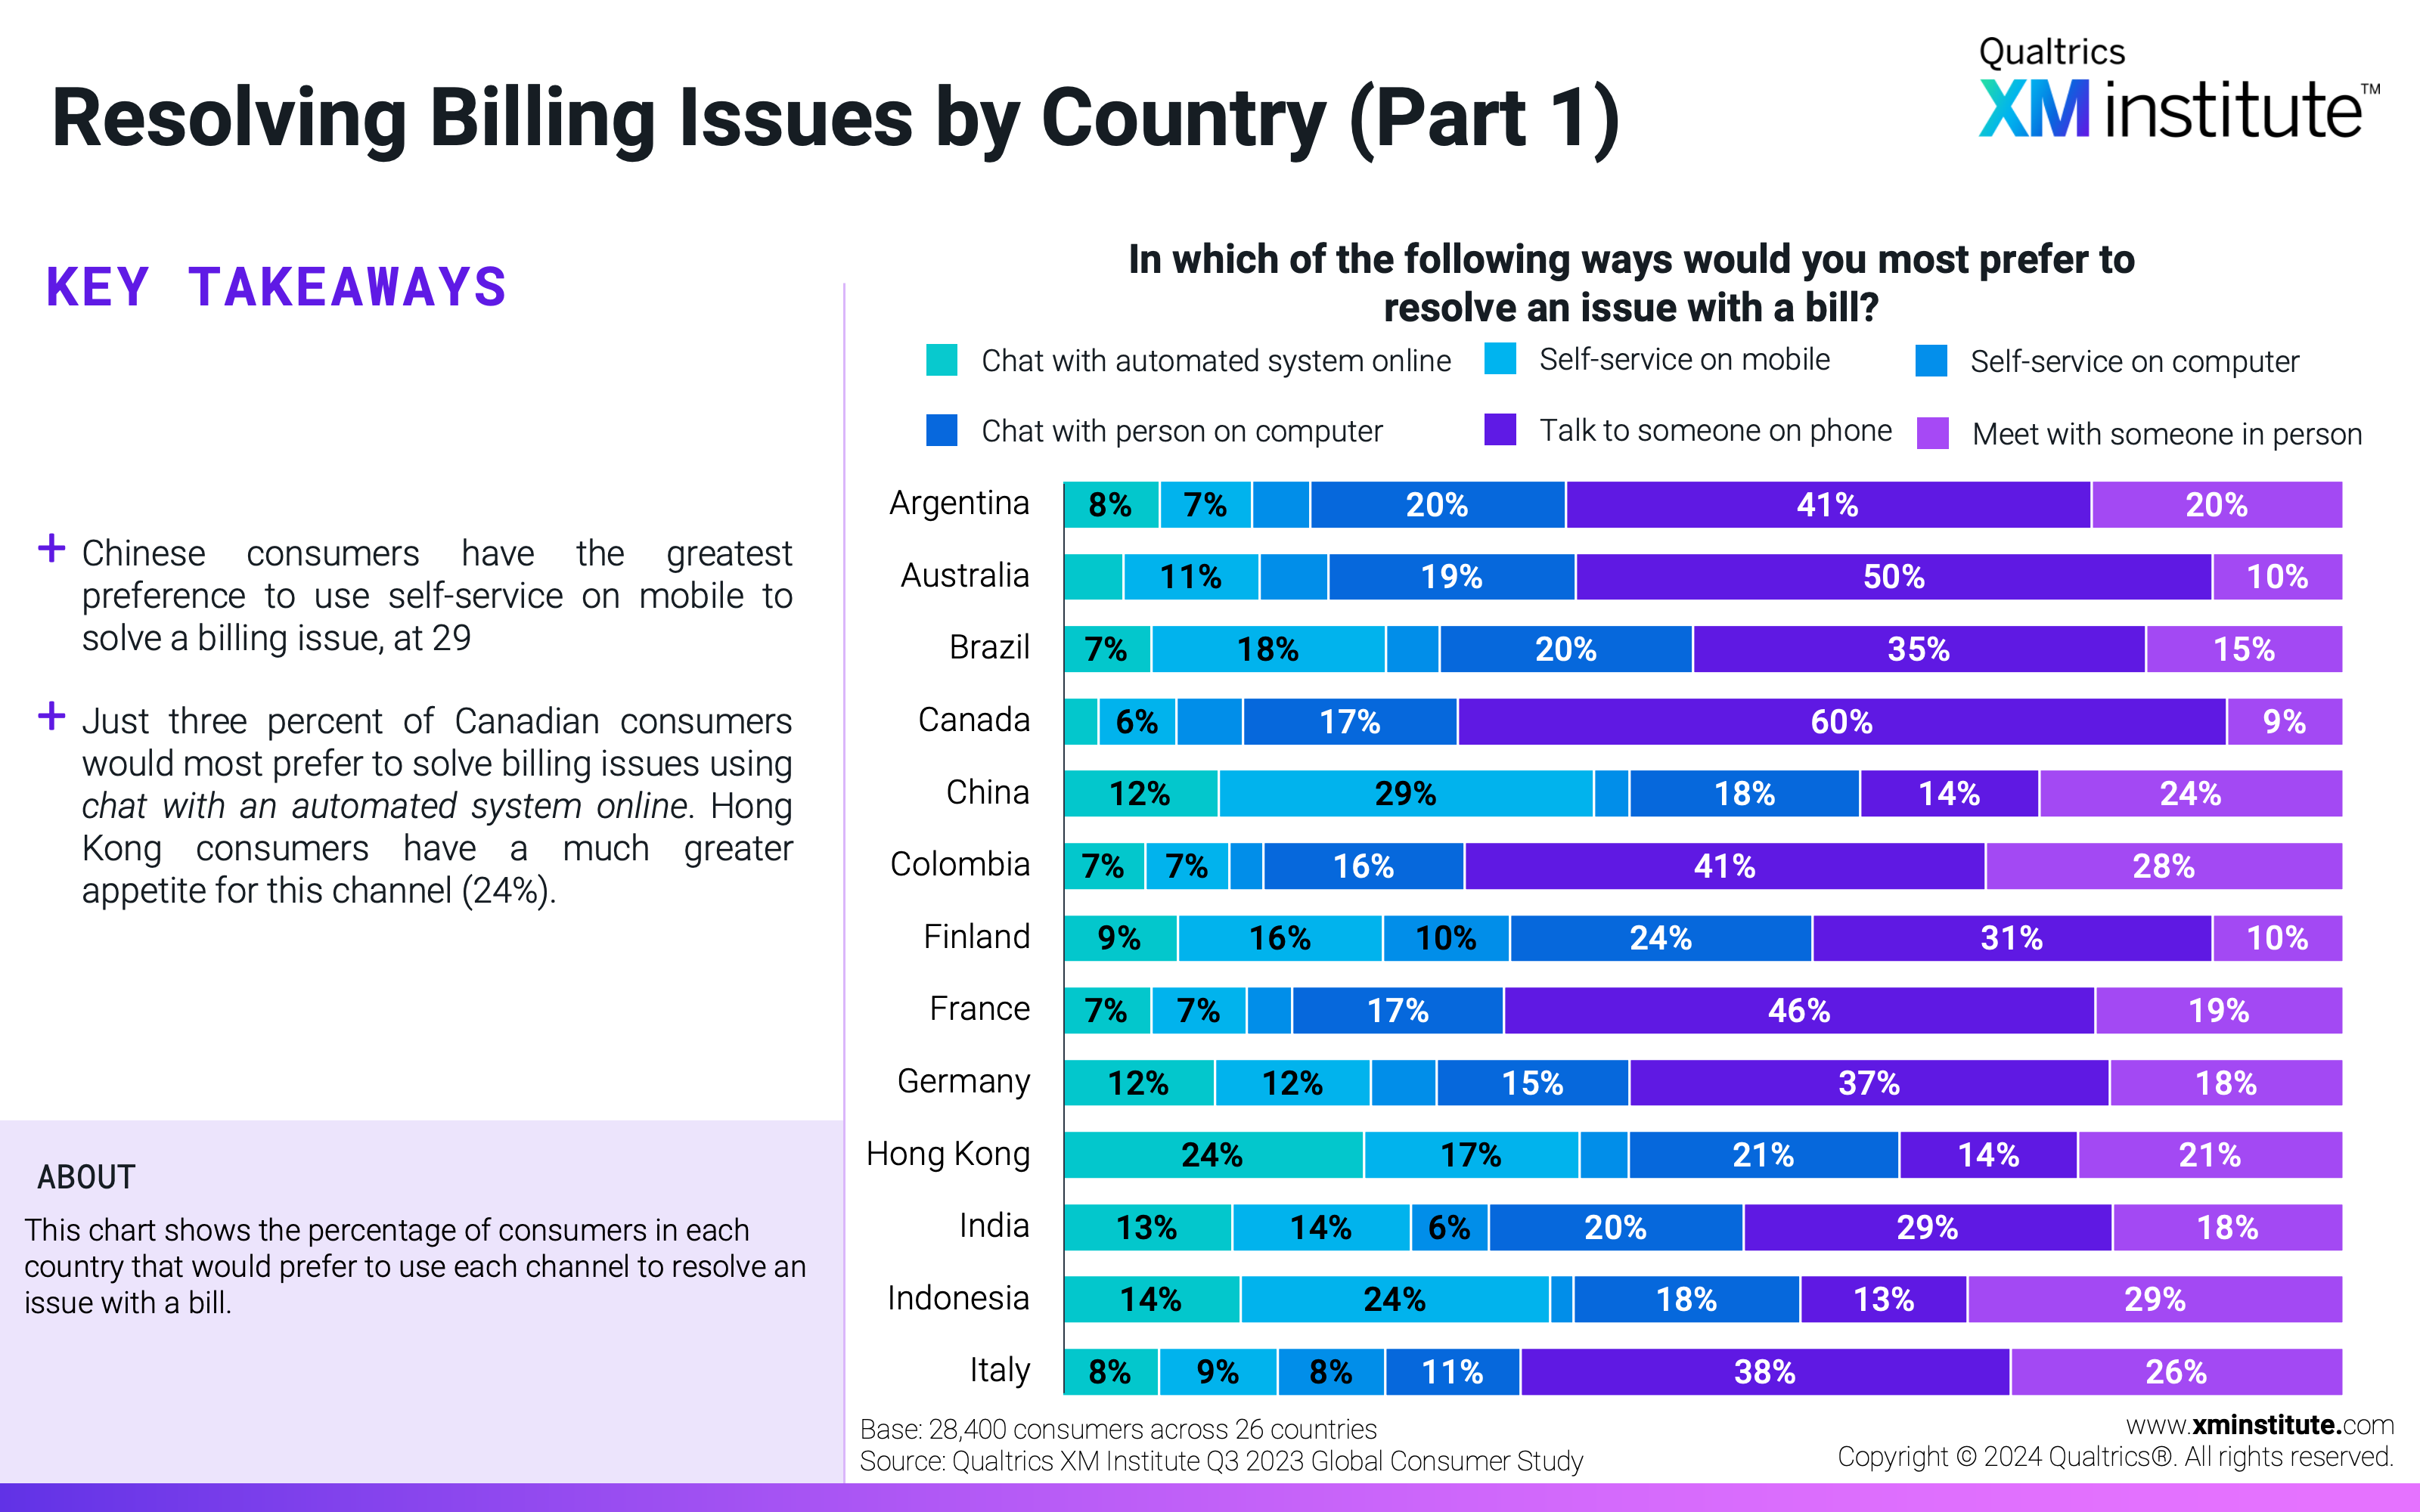 This chart shows the percentage of consumers in each country that would prefer to use each channel to resolve an issue with a bill. 